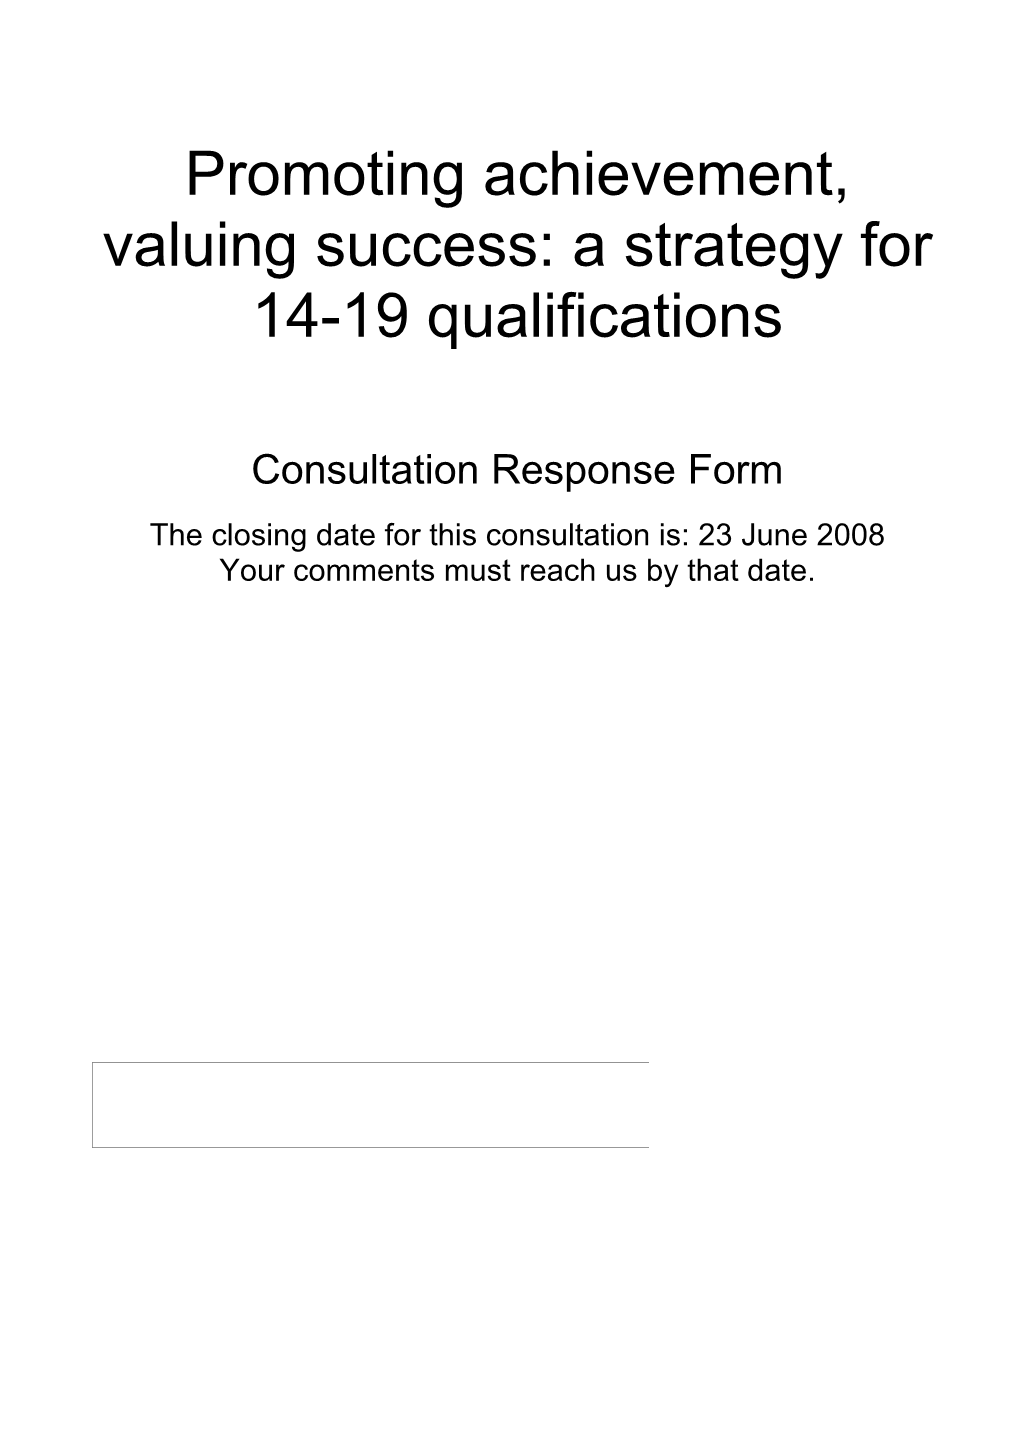 Promoting Achievement, Valuing Success: a Strategy for 14-19 Qualifications